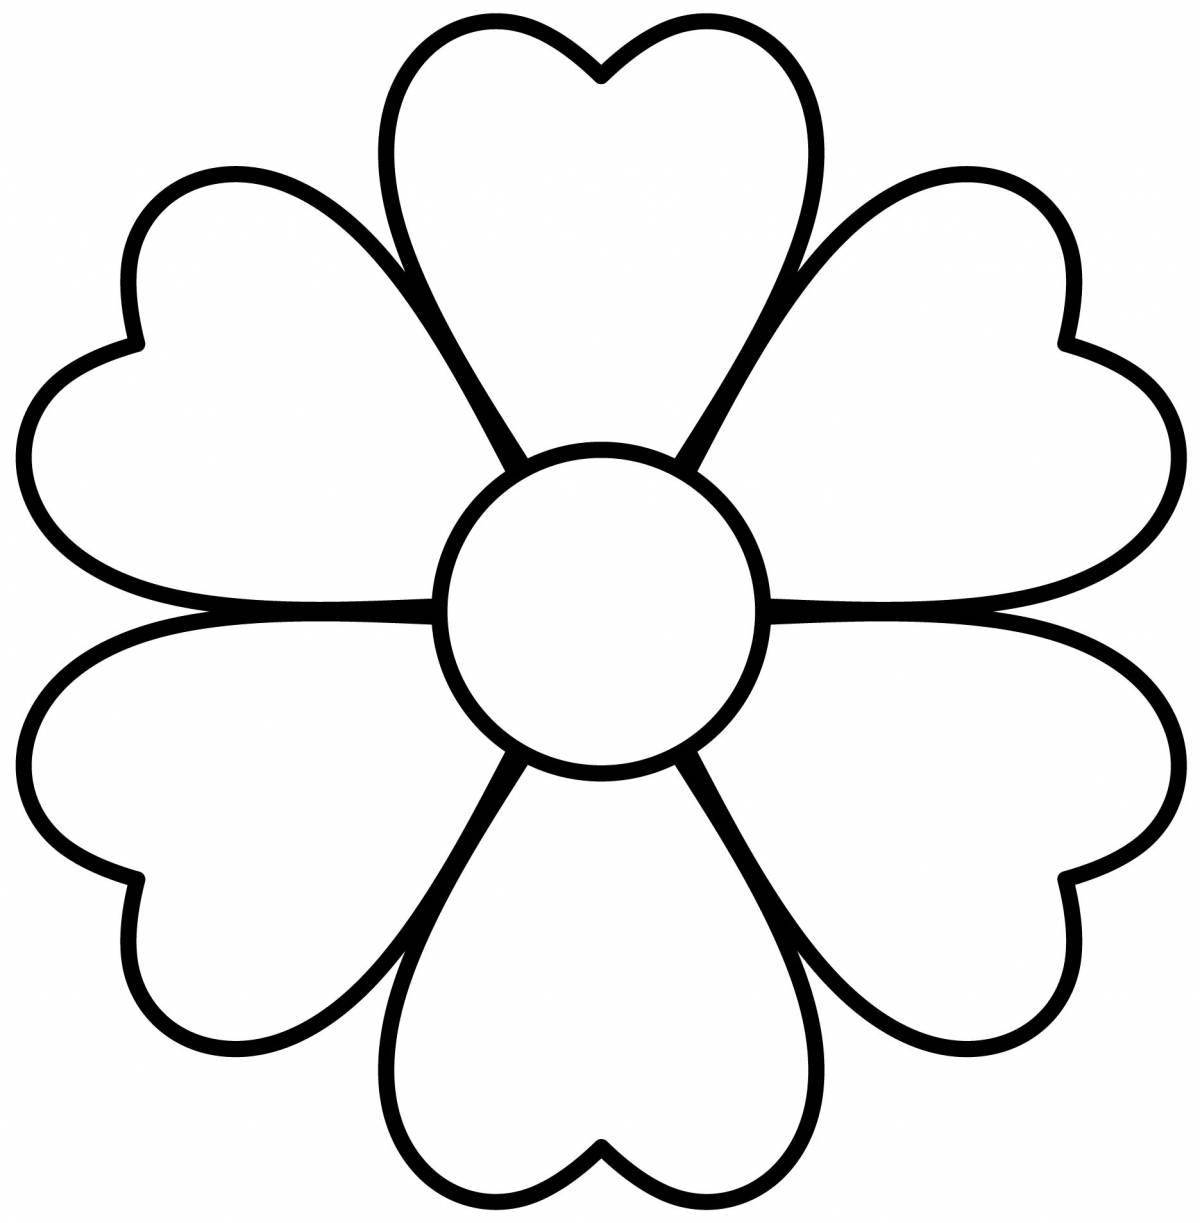 Blissful coloring book for children 2-3 years old flower